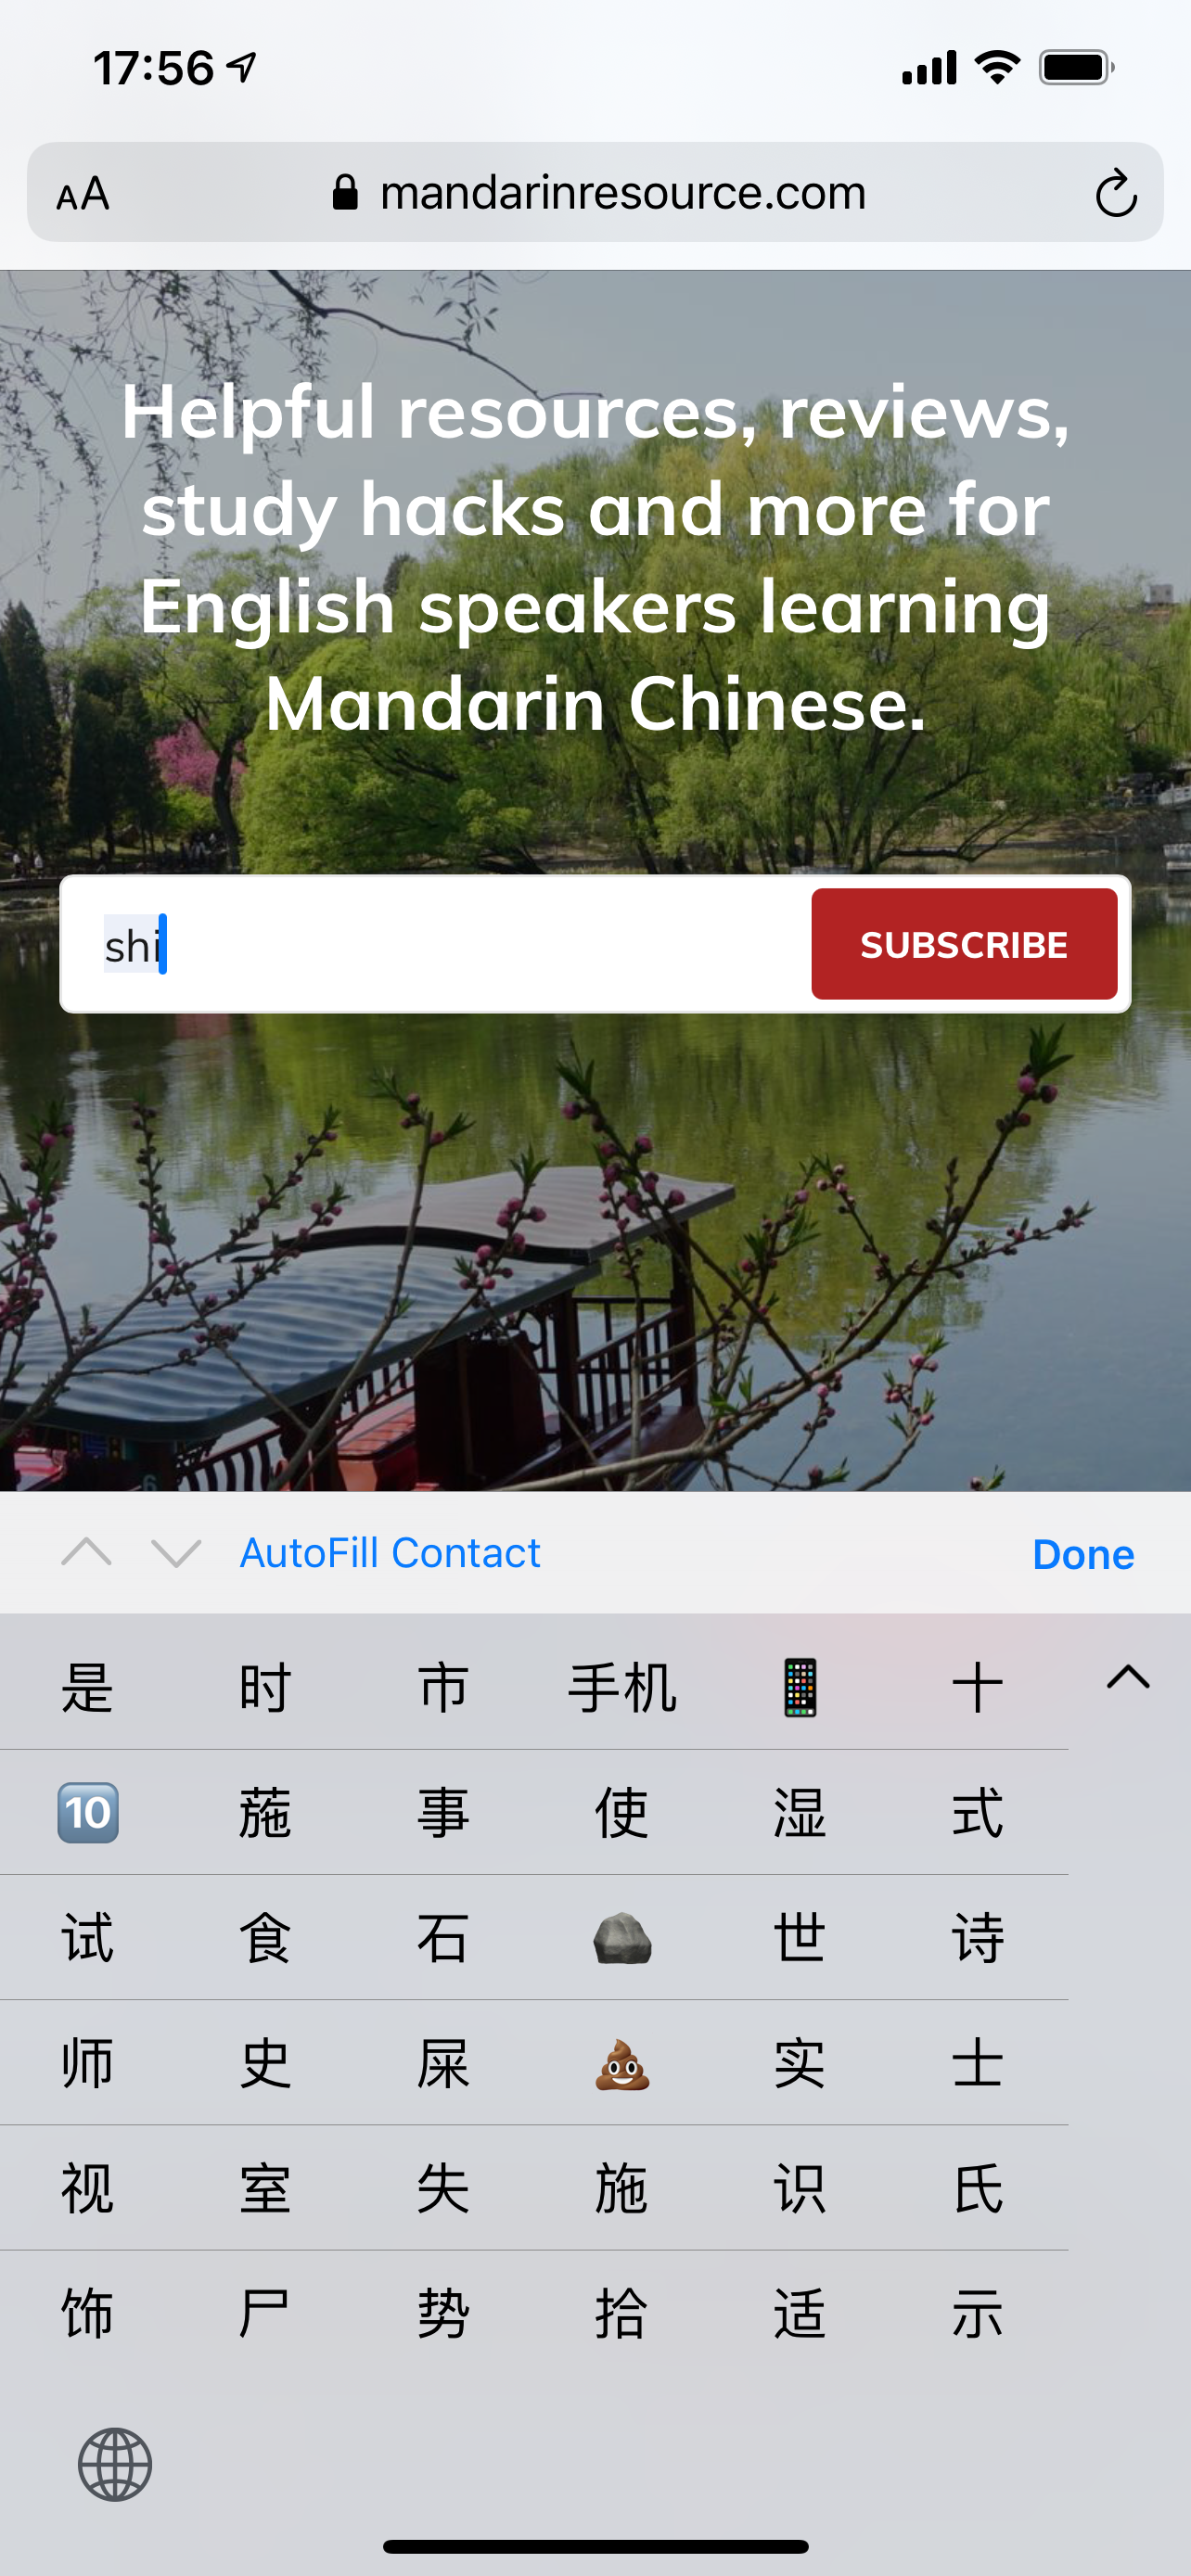 How to type in Chinese on iOS and iPadOS